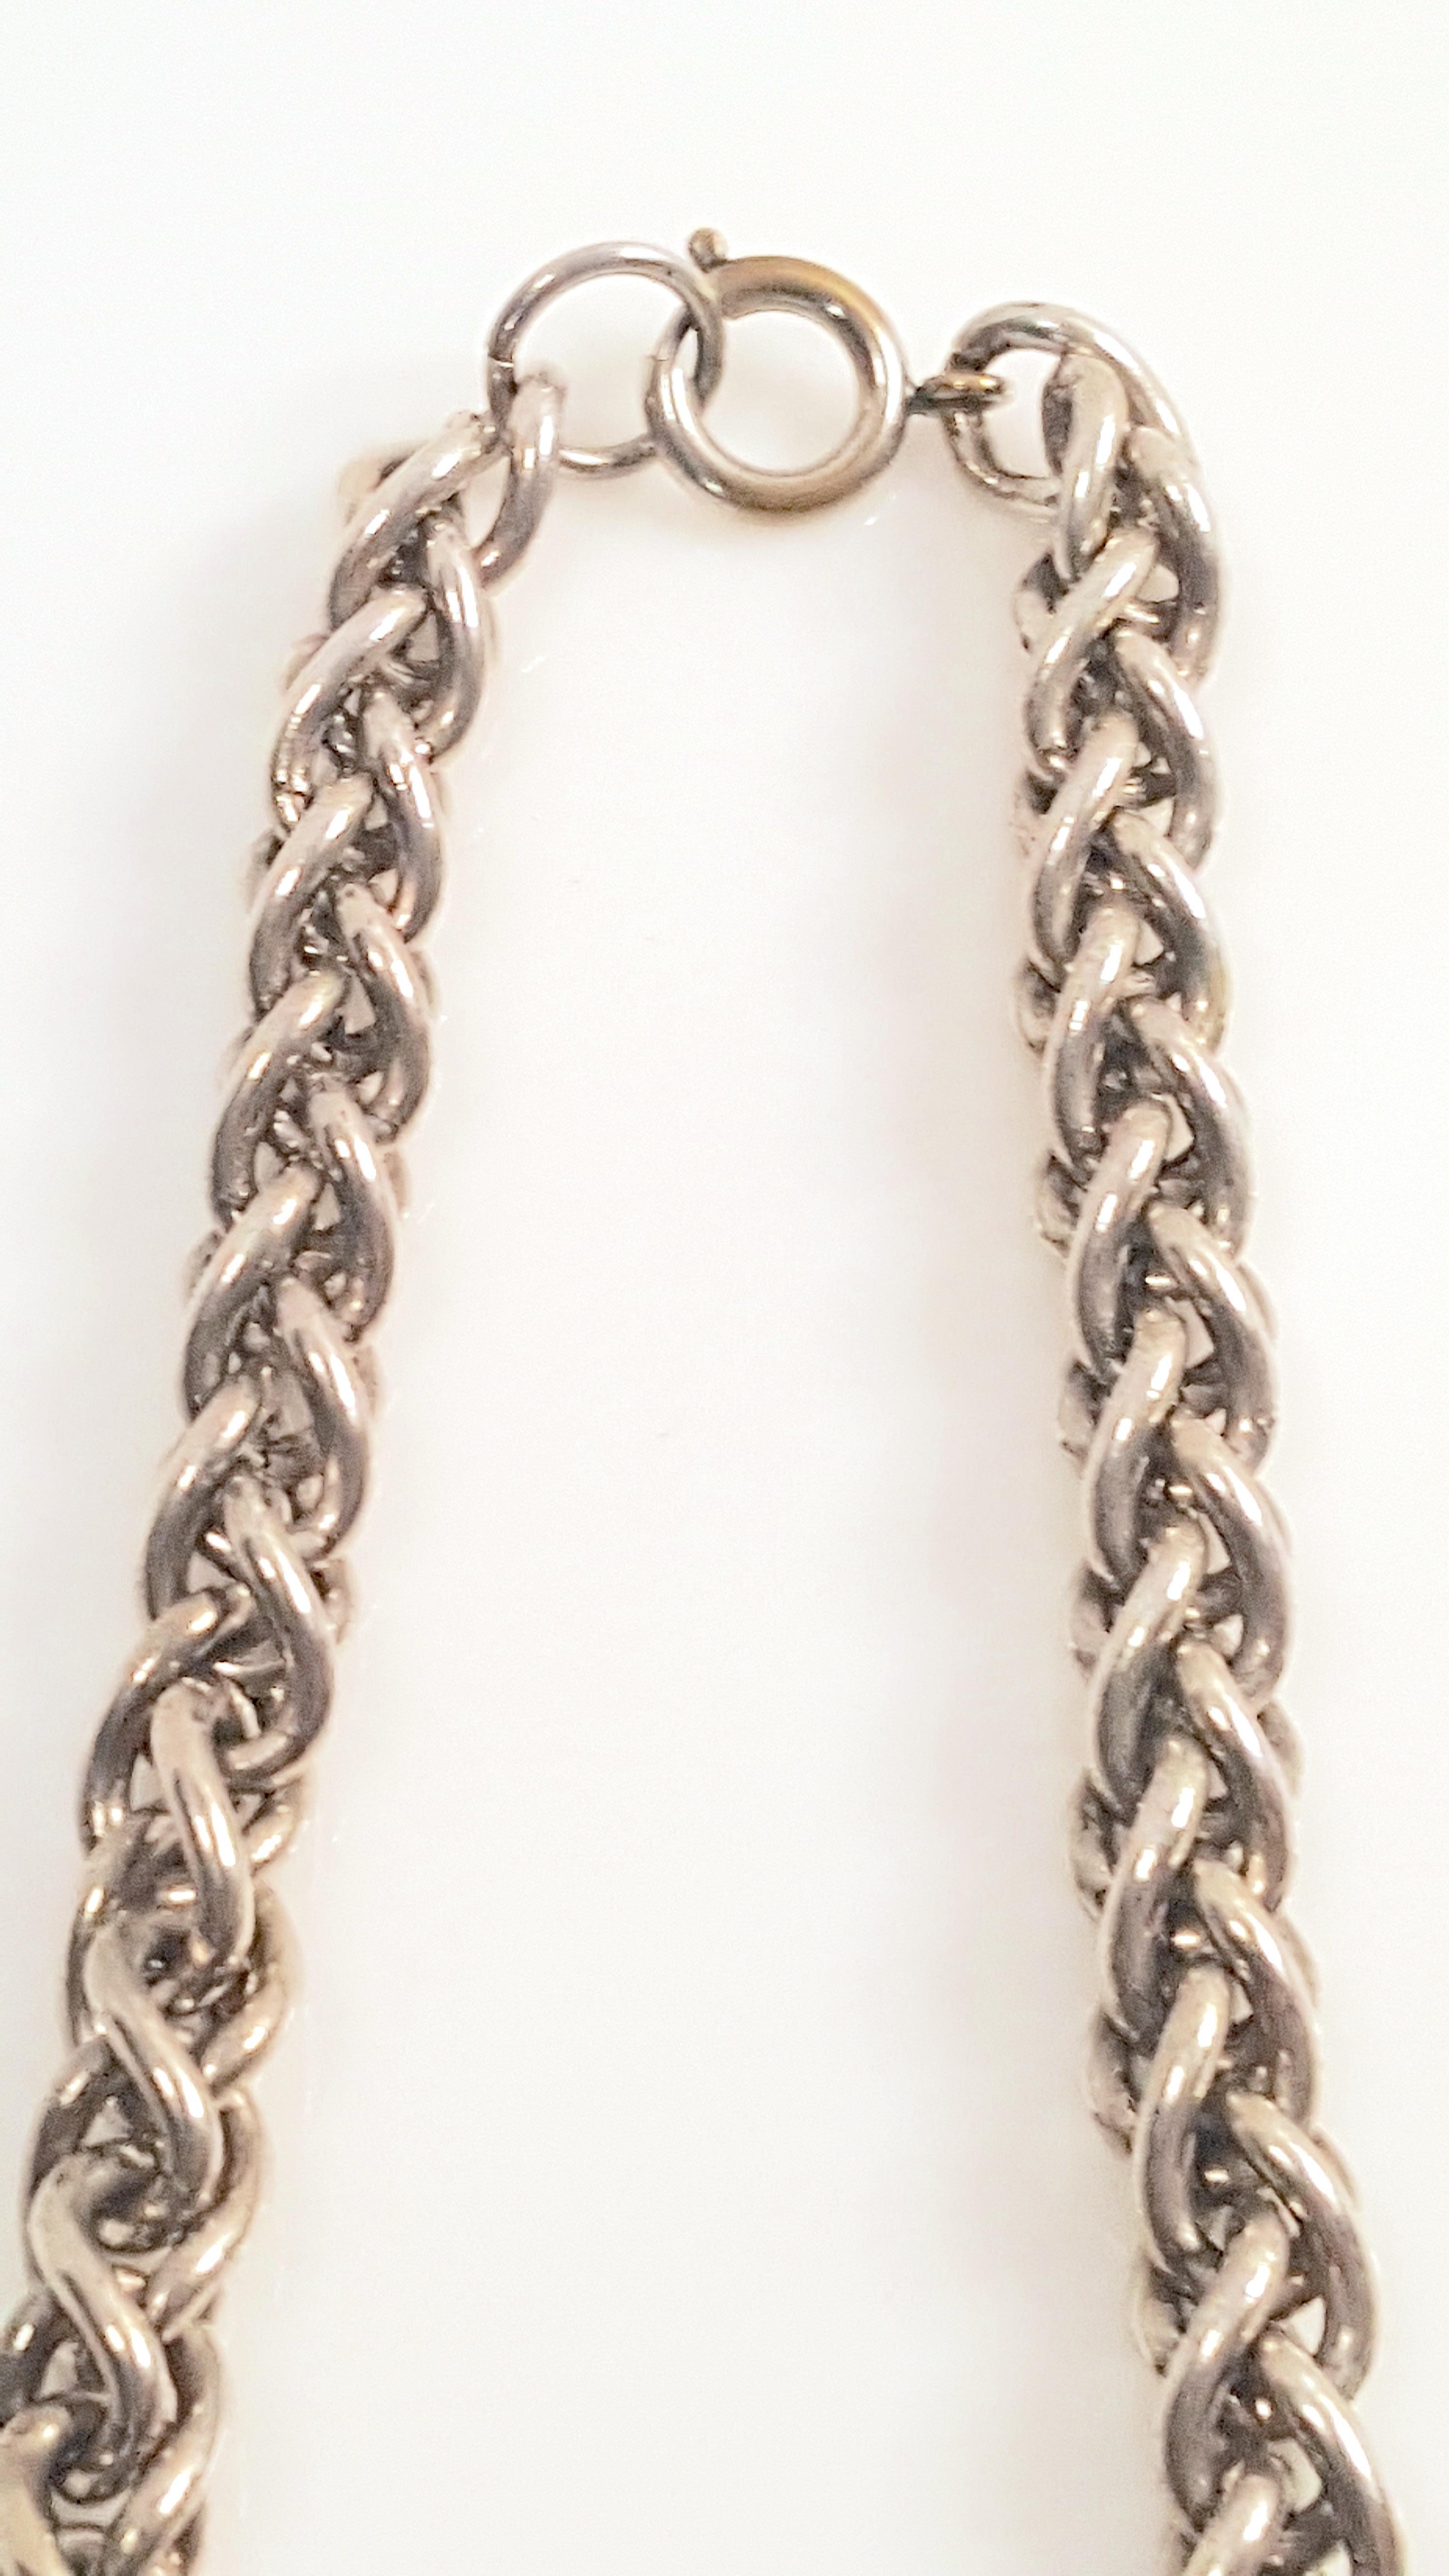 Couture Late1920s ChanelRousseletStyle PearlescentPendants SilverChain Necklace In Good Condition For Sale In Chicago, IL